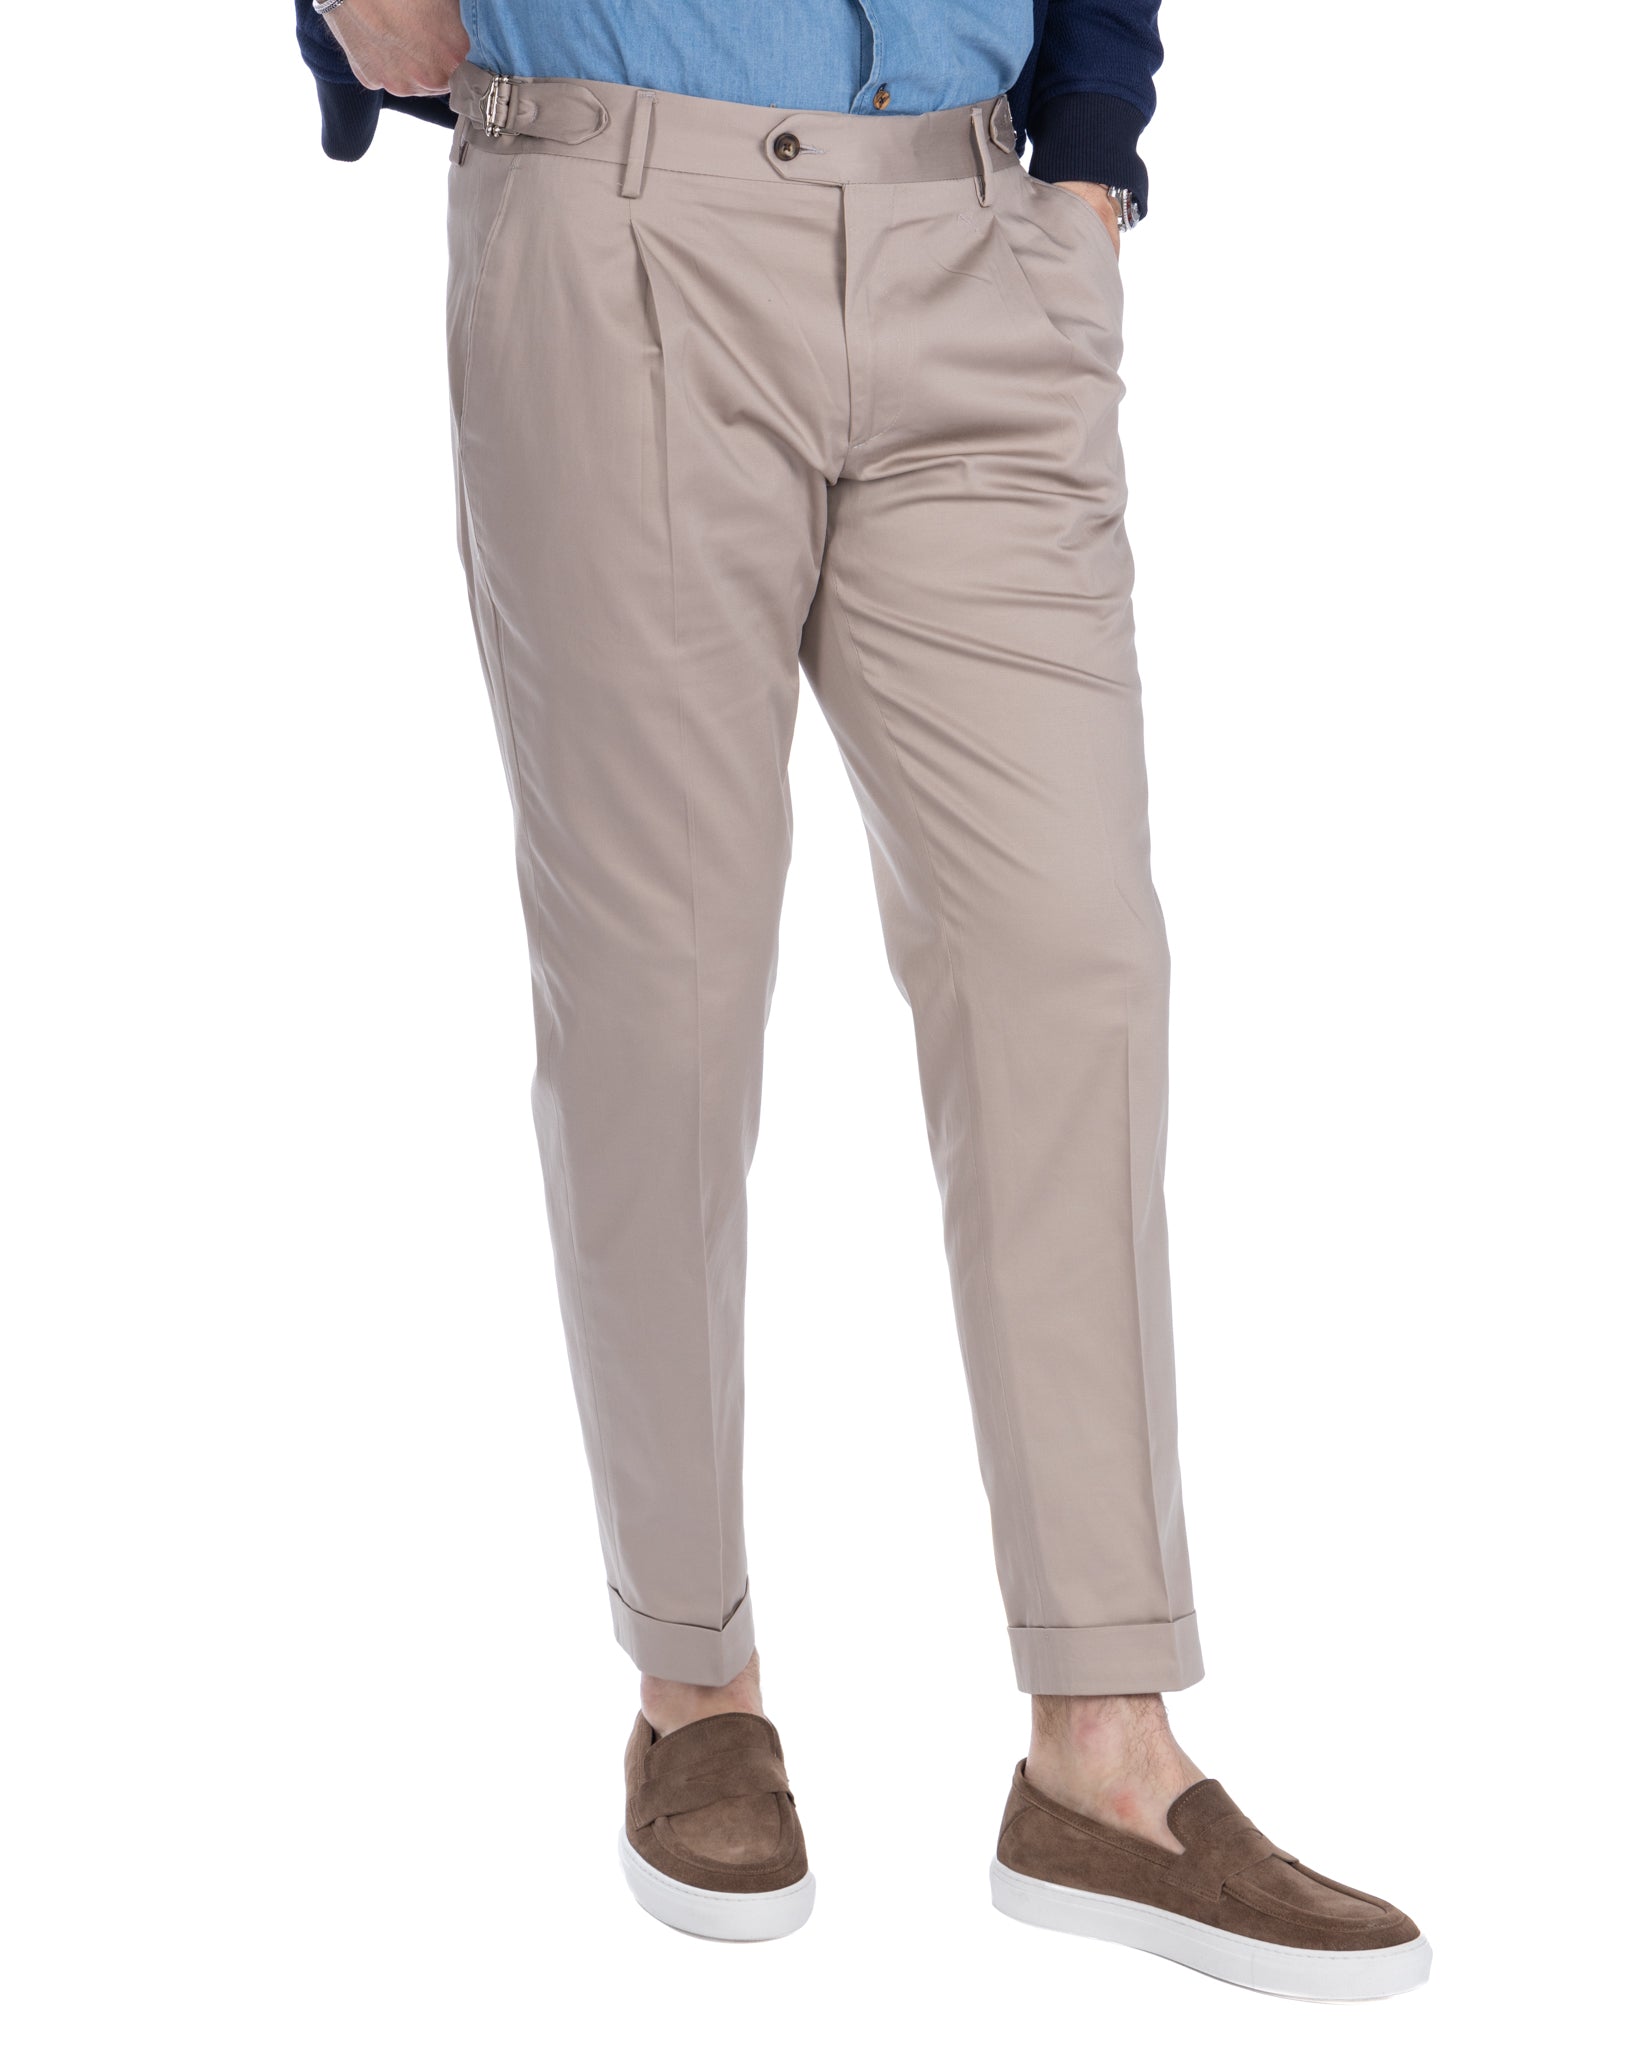 James - beige high-waisted trousers with buckles